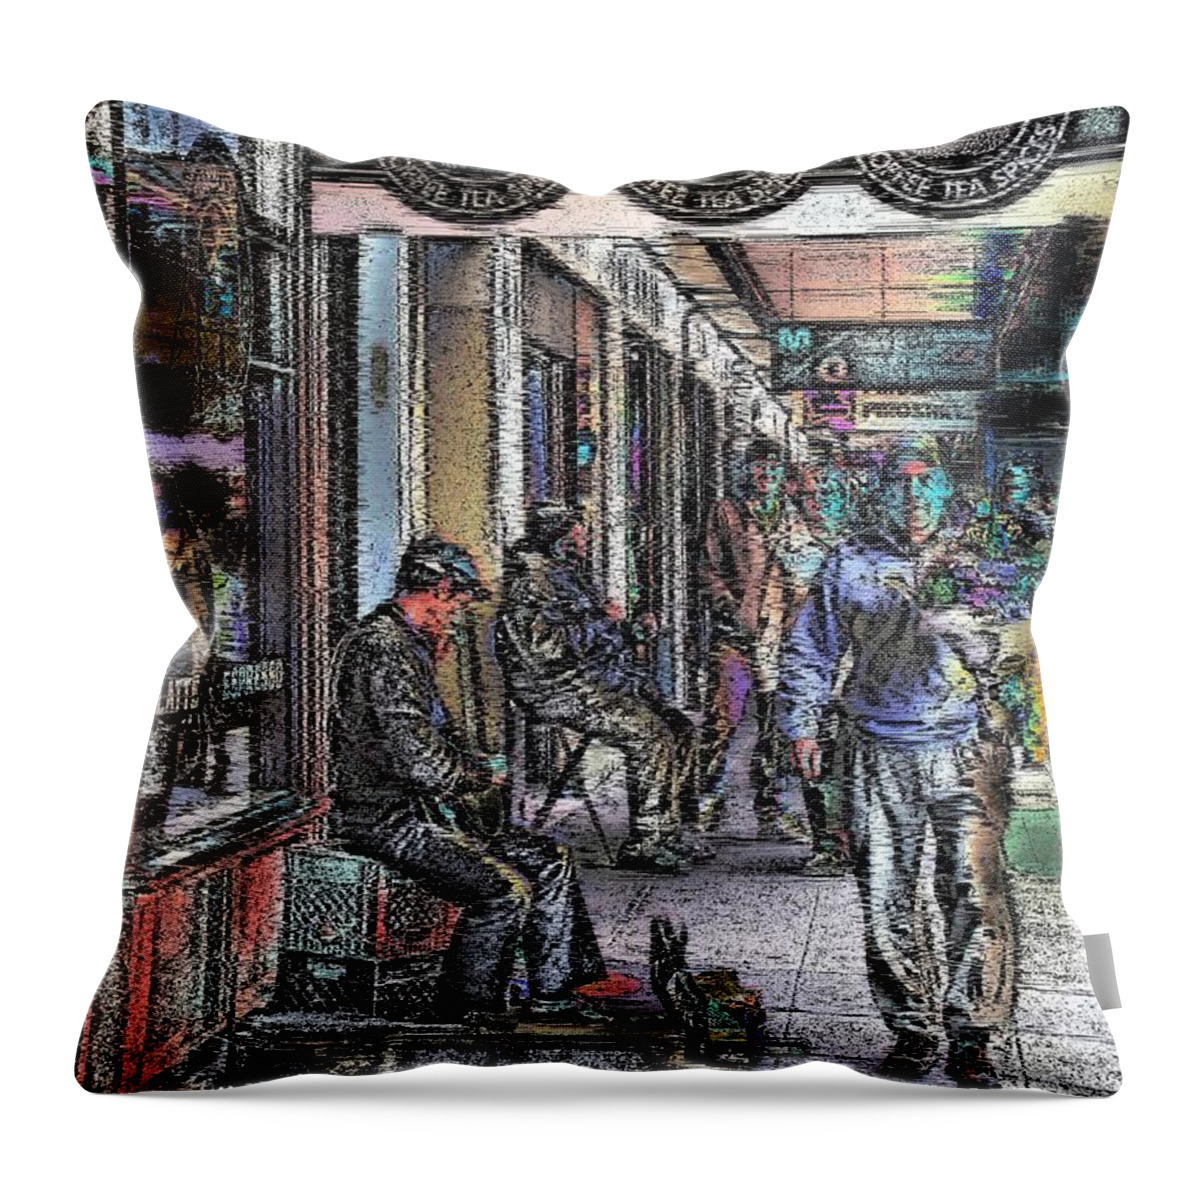 Market Throw Pillow featuring the digital art A Day At The Market by Tim Allen